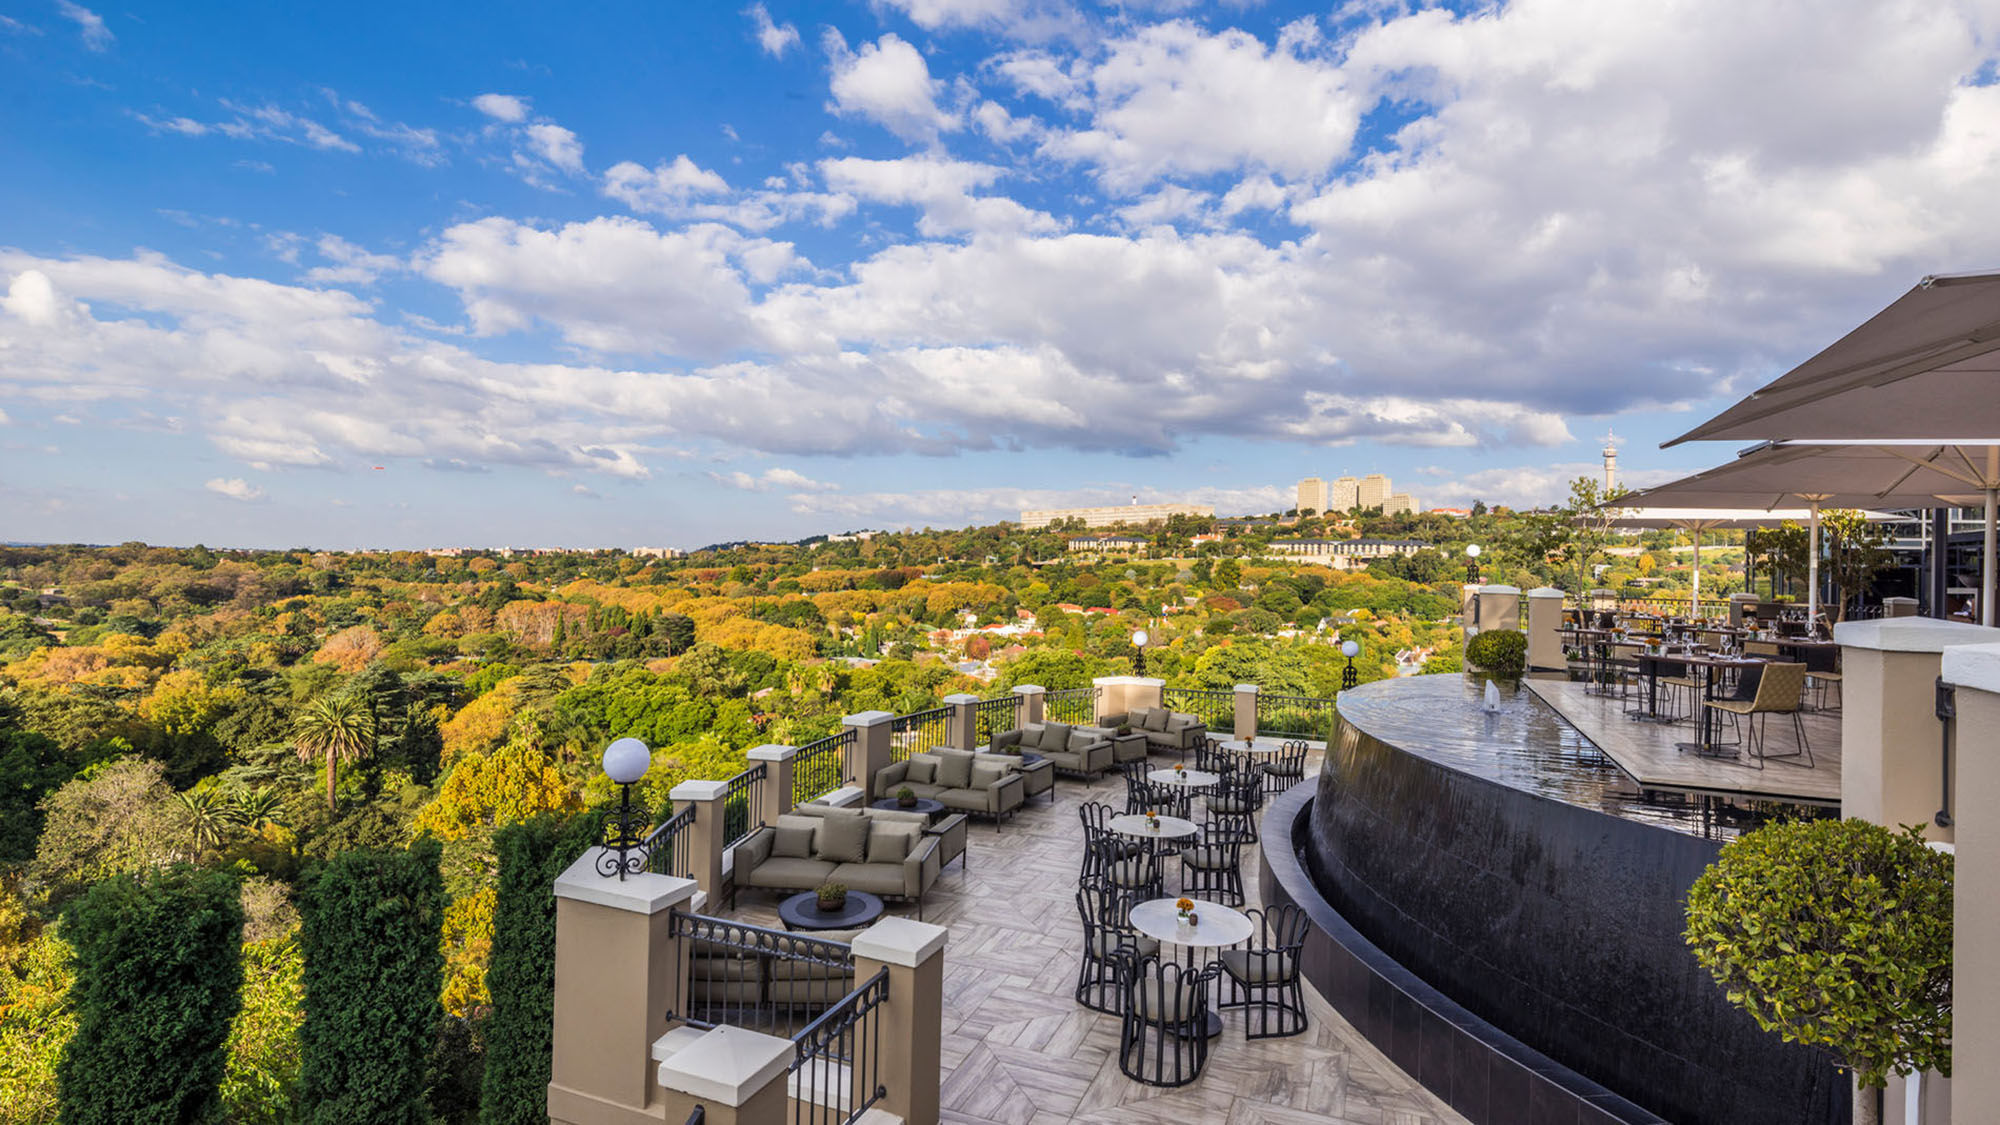 The outdoor dining area at the Four Seasons Hotel, the Westcliff overlooks Johannesburg.